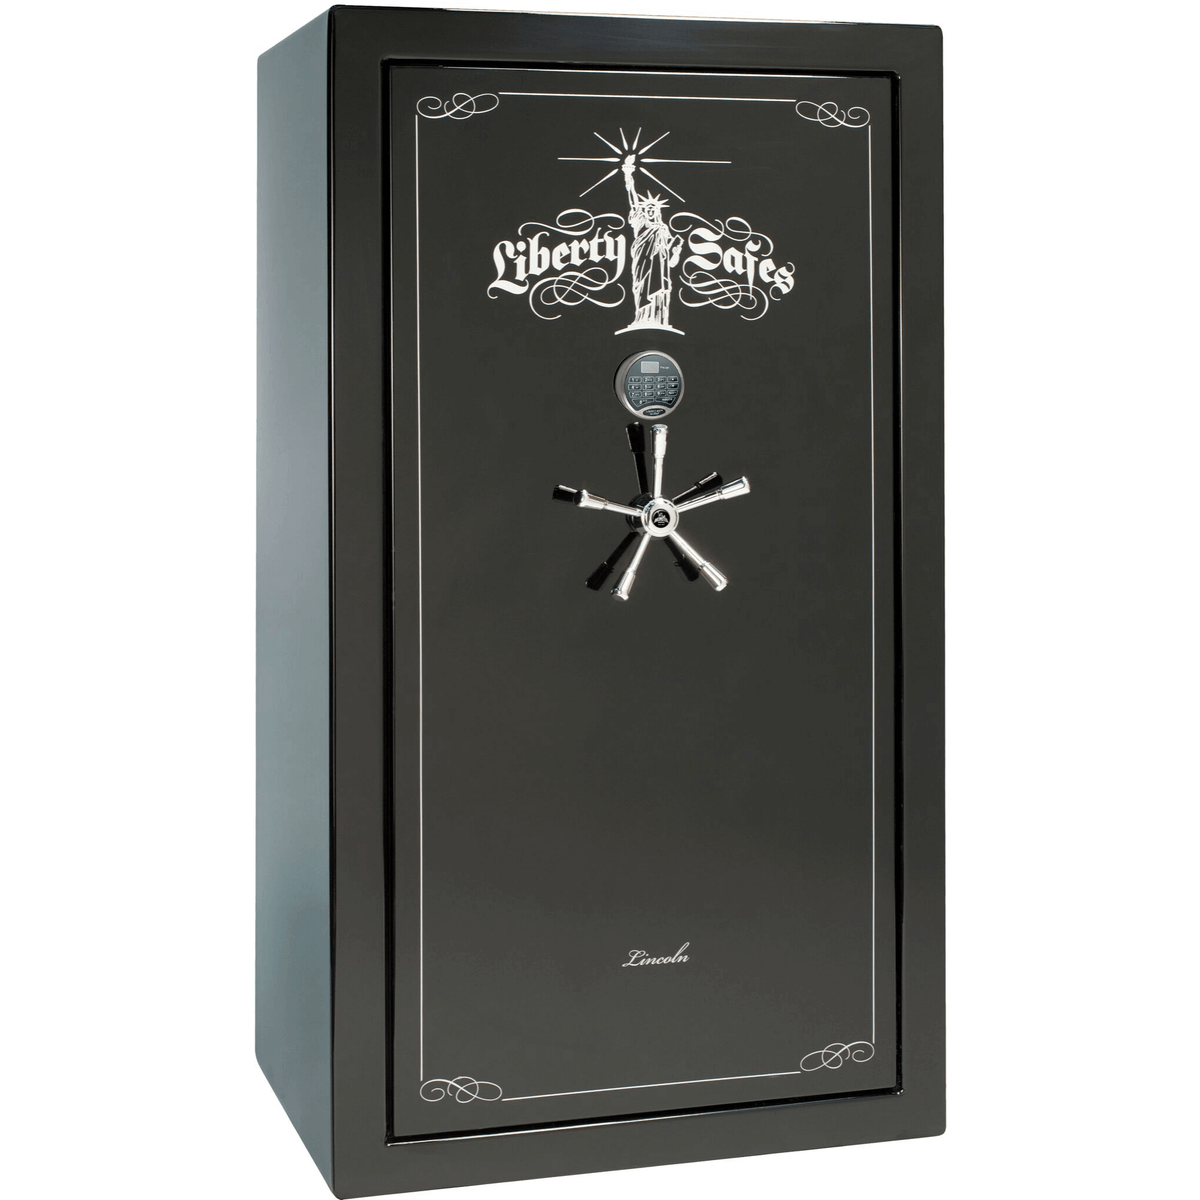 Liberty Lincoln 40 Safe in Black Gloss with Chrome Electronic Lock.